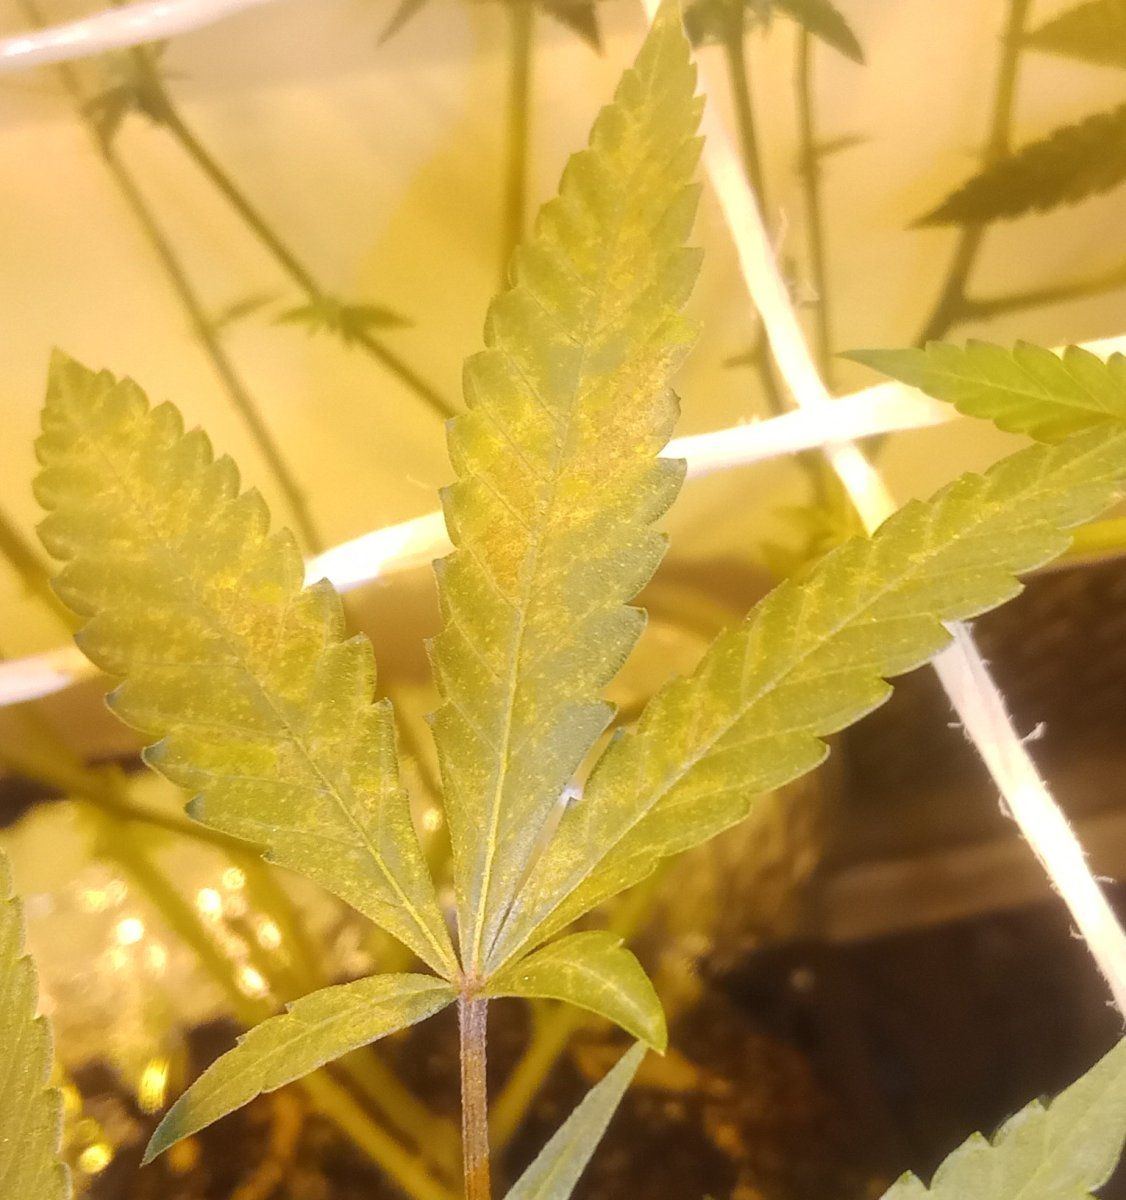 Help  i am finding leaves with spots and brown blotches   what did i do wrong